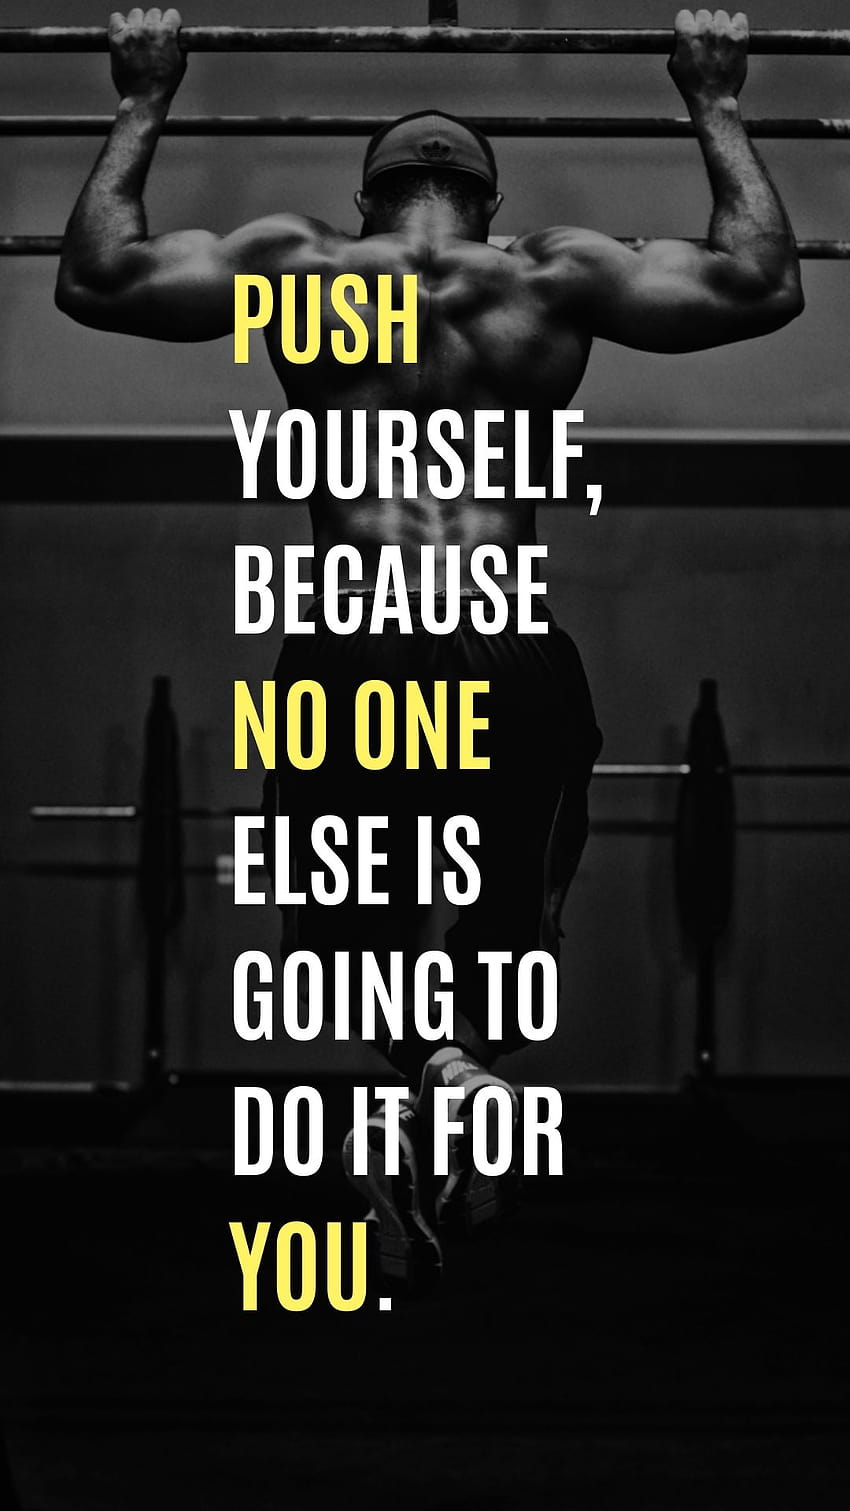 Workout quotes phone Printfidaa black backgrounds fitness quotes keep calm amazon in, mobile motivational workout HD phone wallpaper